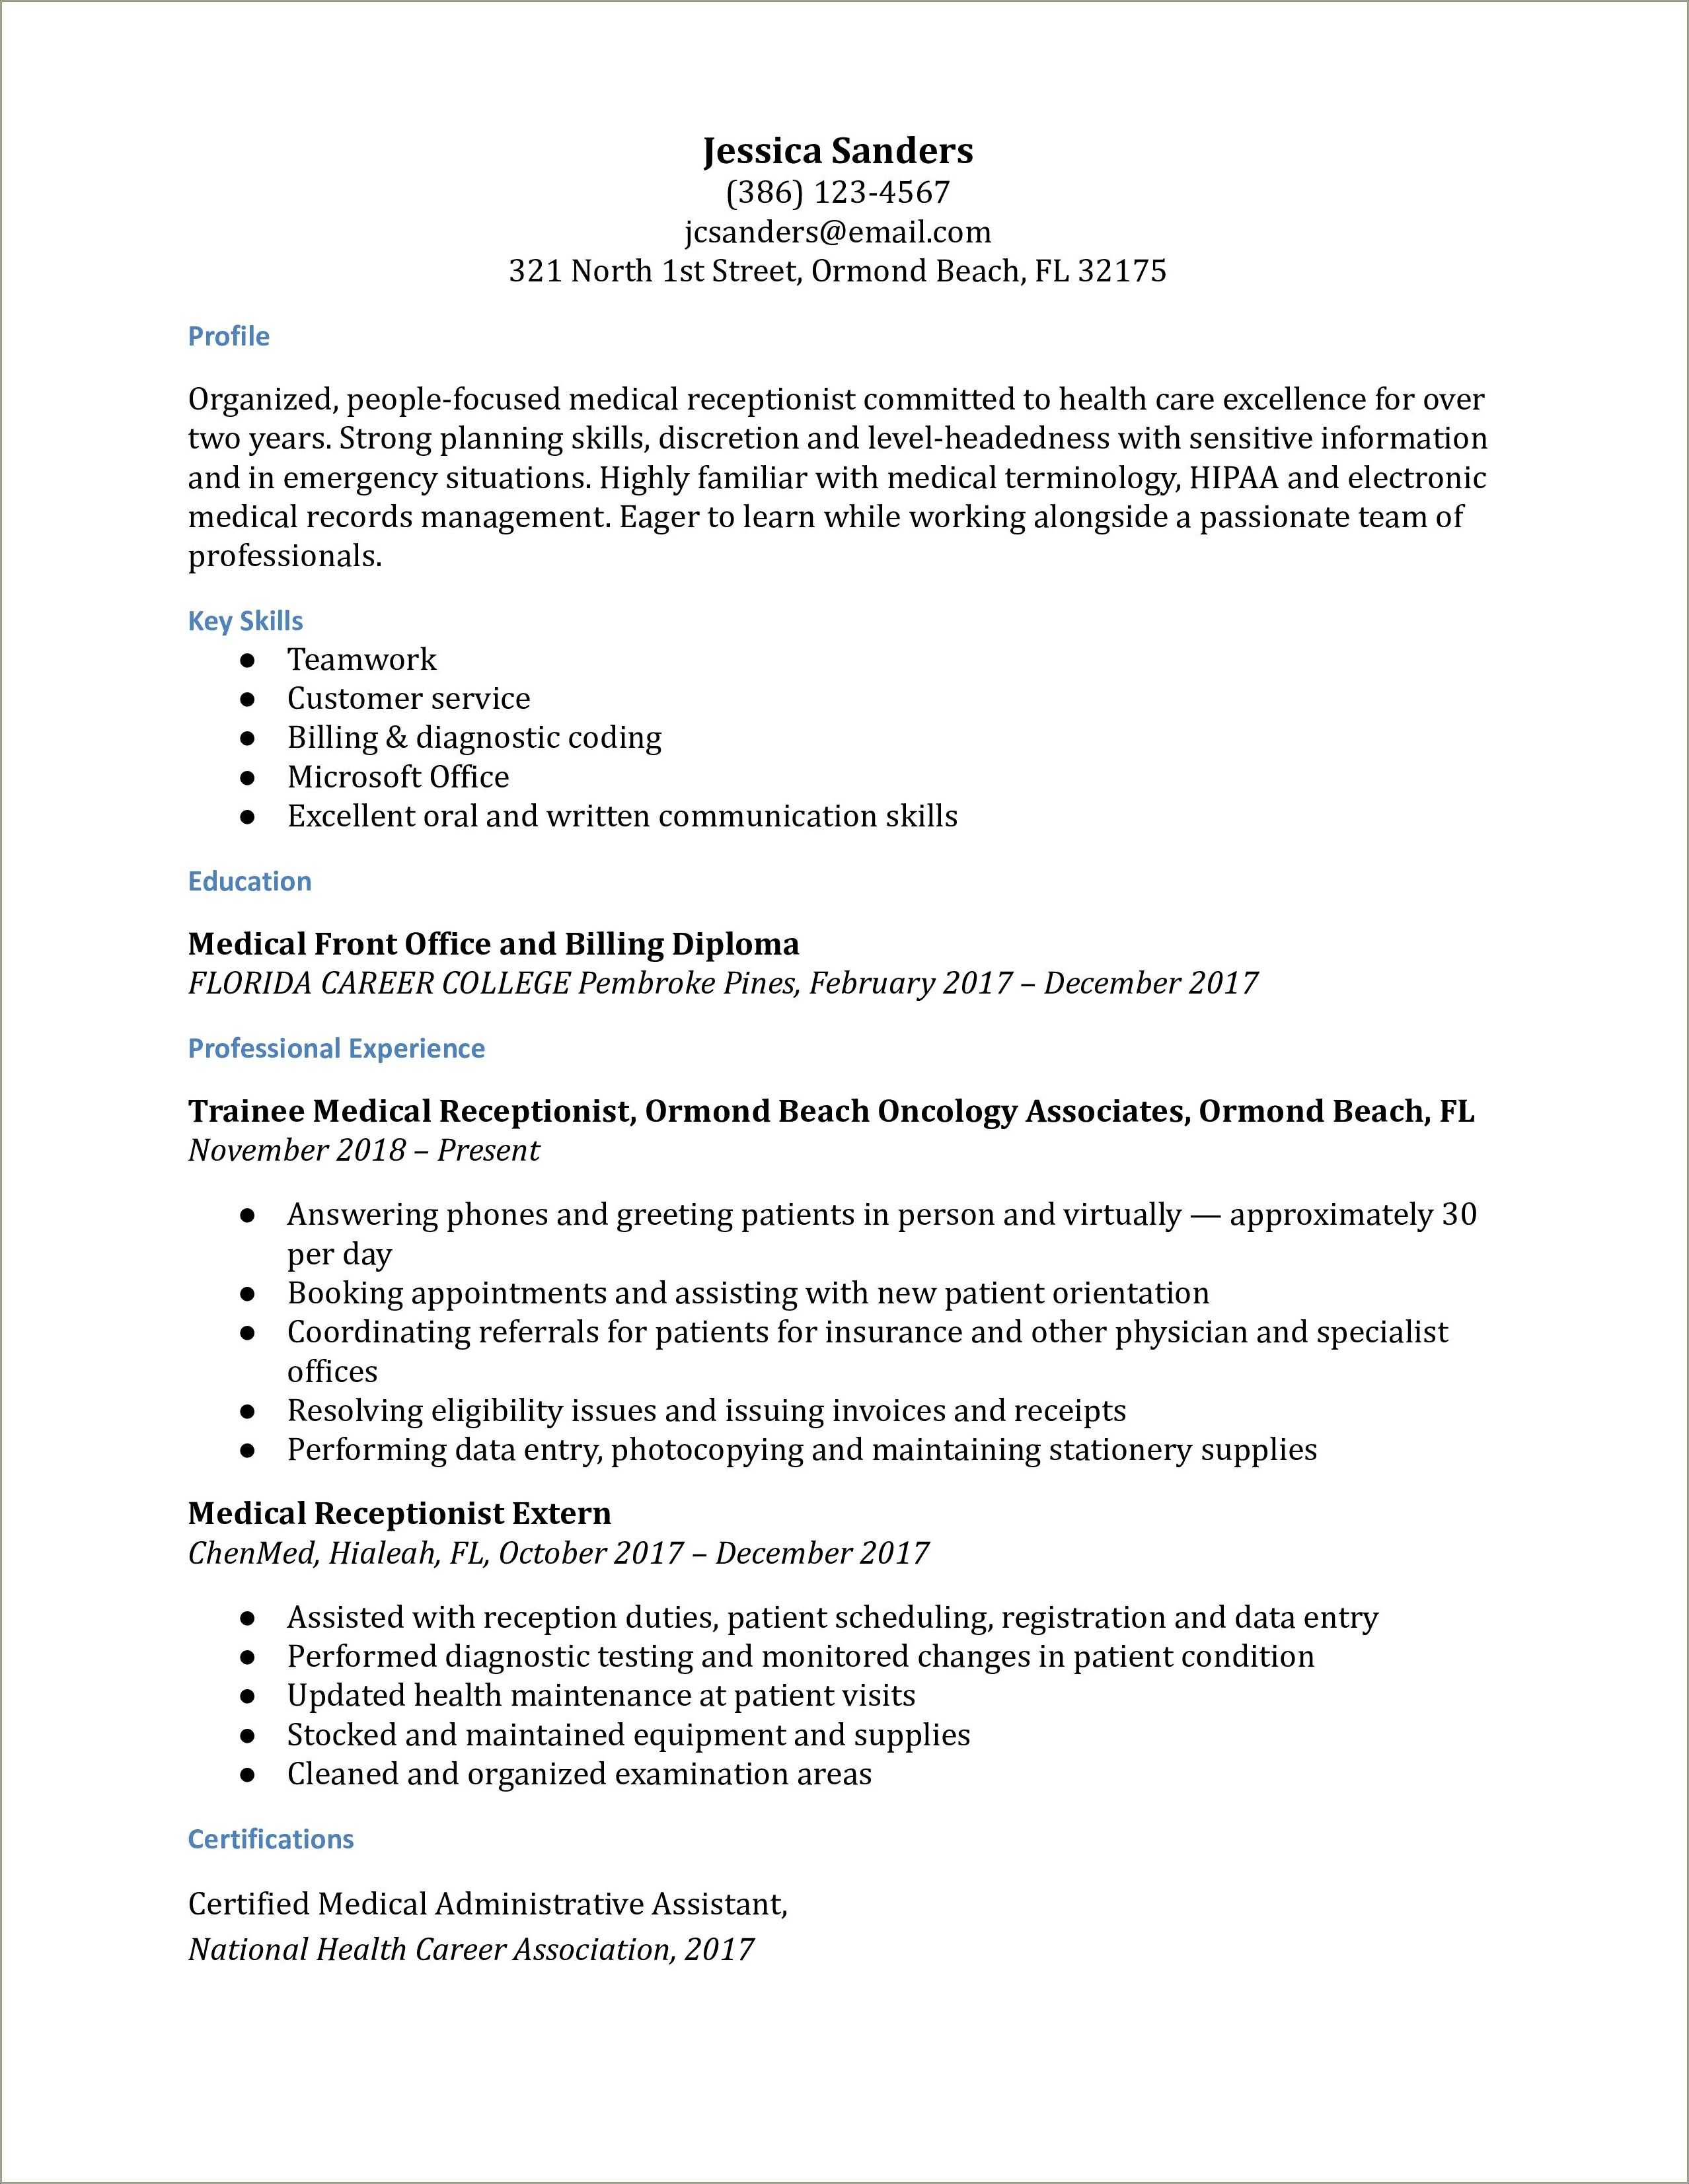 Examples Of Medical Office Receptionist Resume - Resume Example Gallery